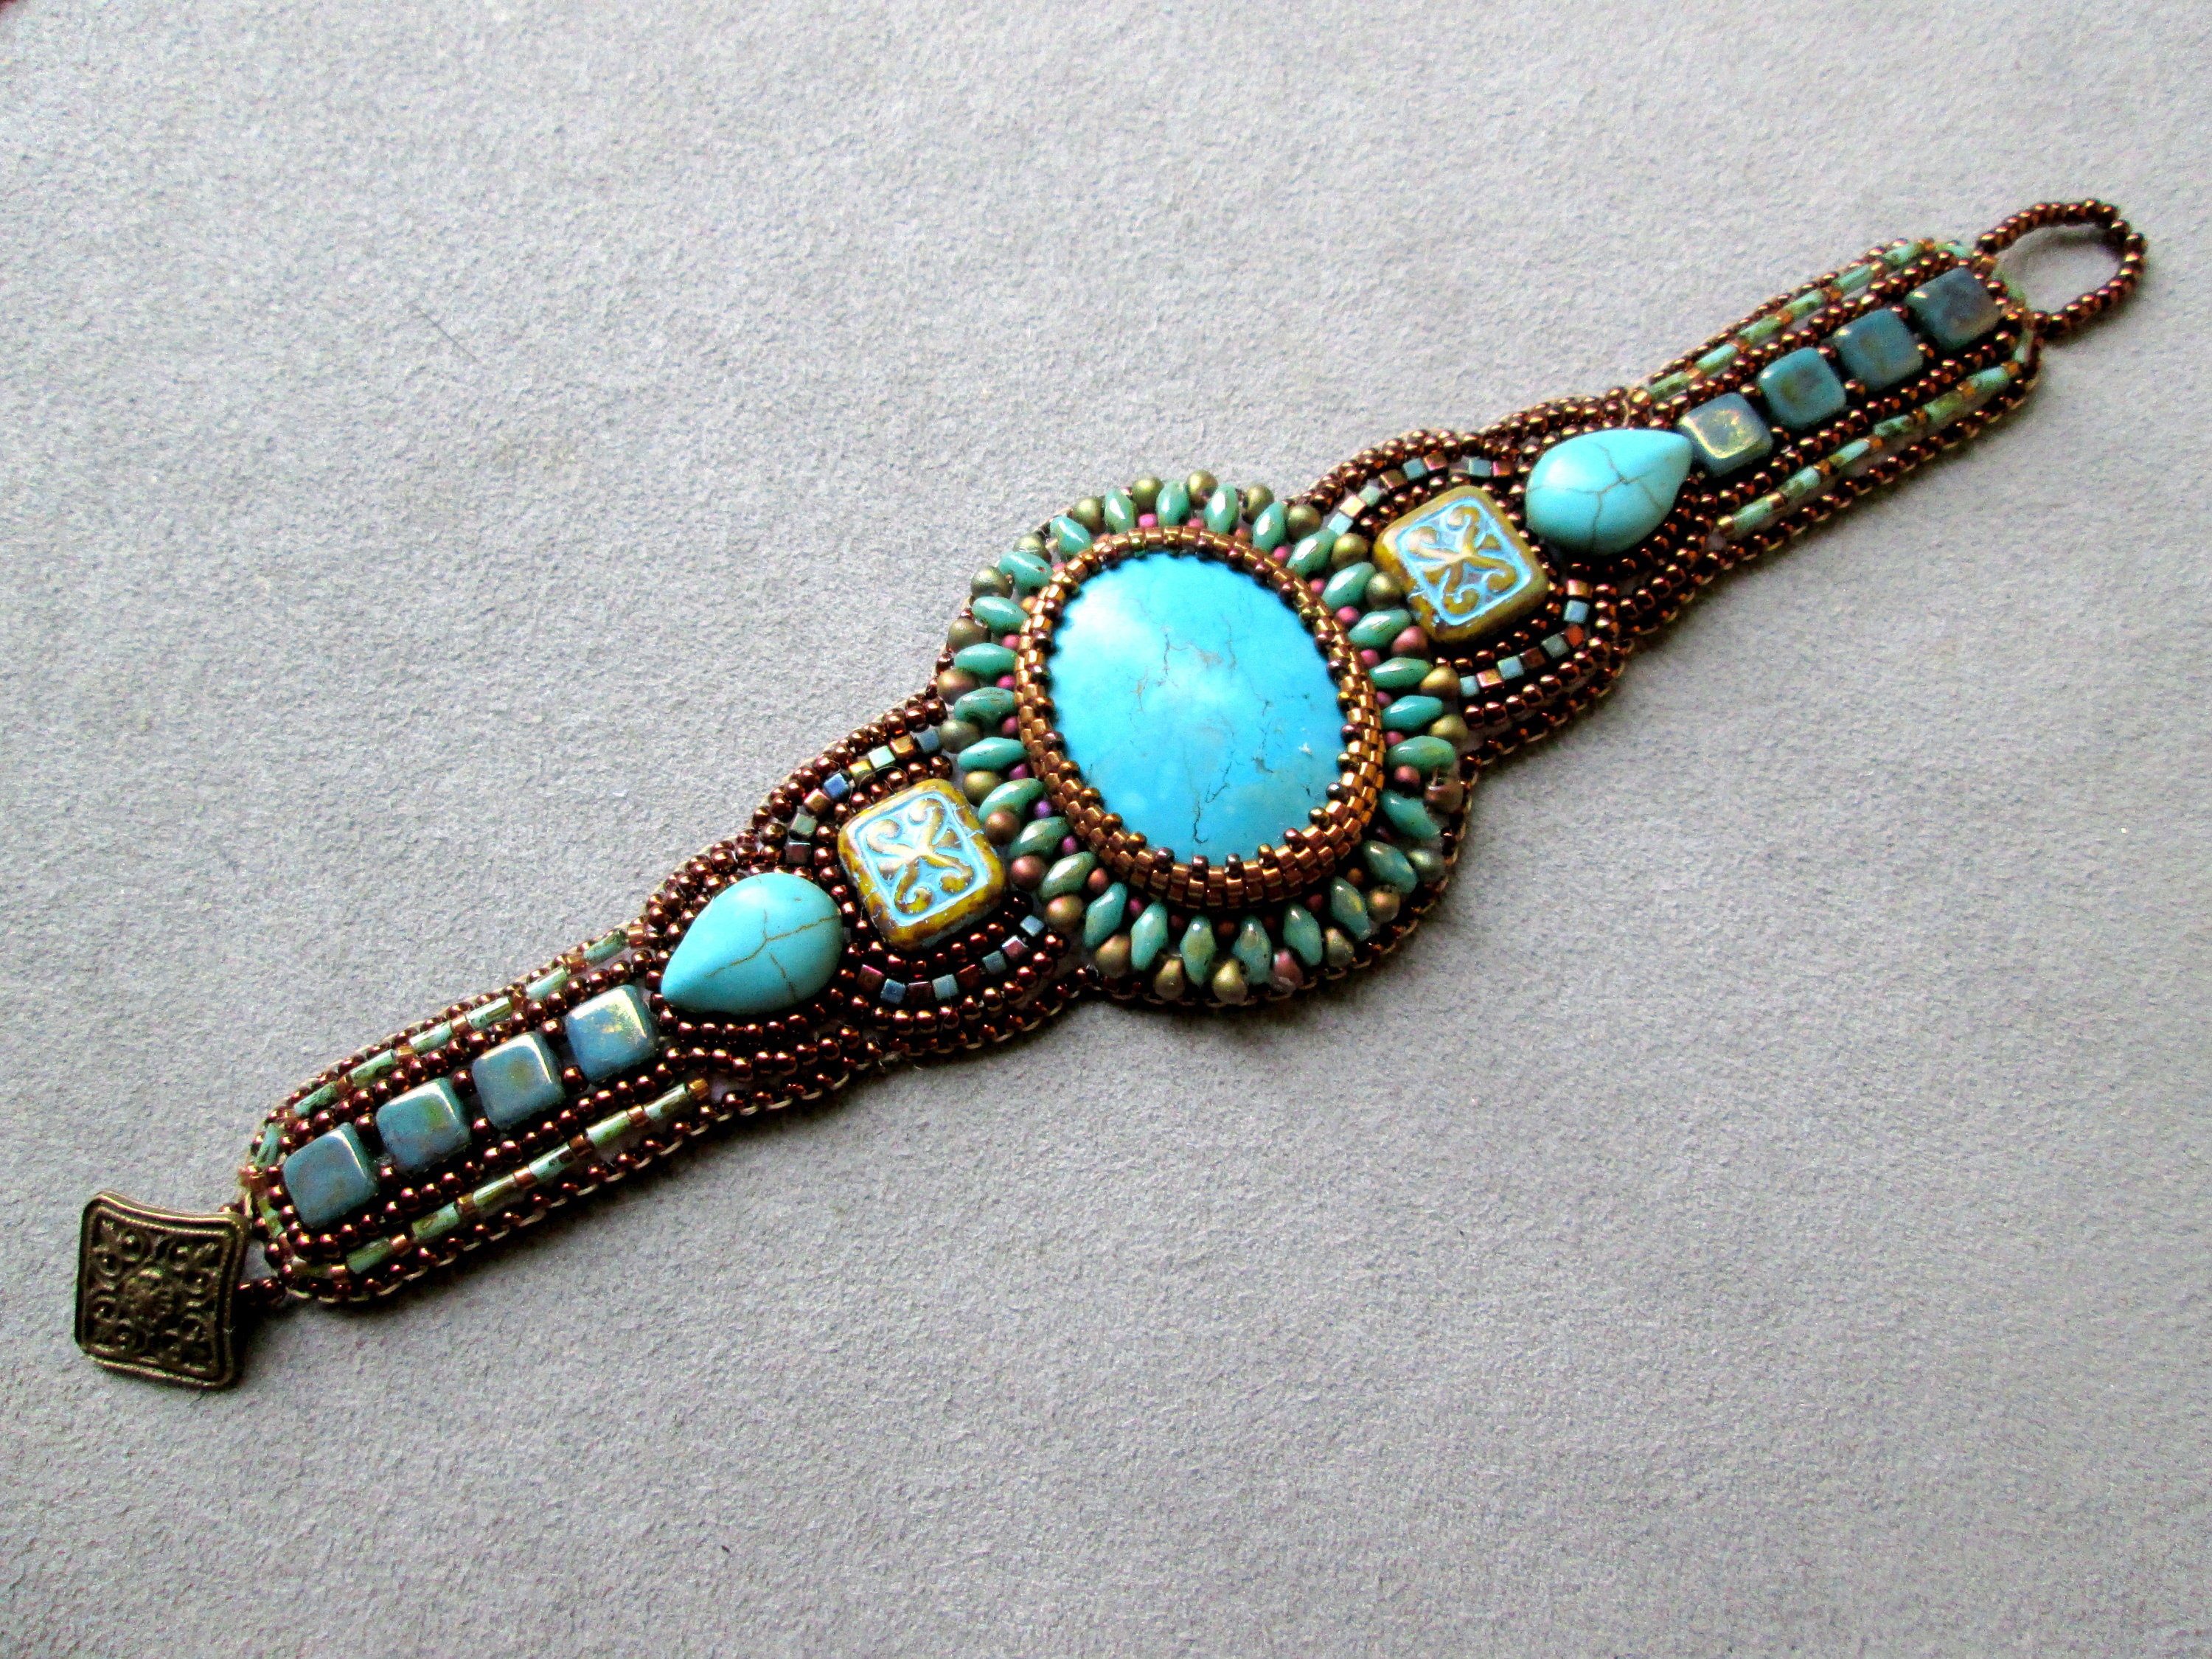 KIT DIY Bead Embroidery Bracelet KIT limited Edition Turquoise antique ...